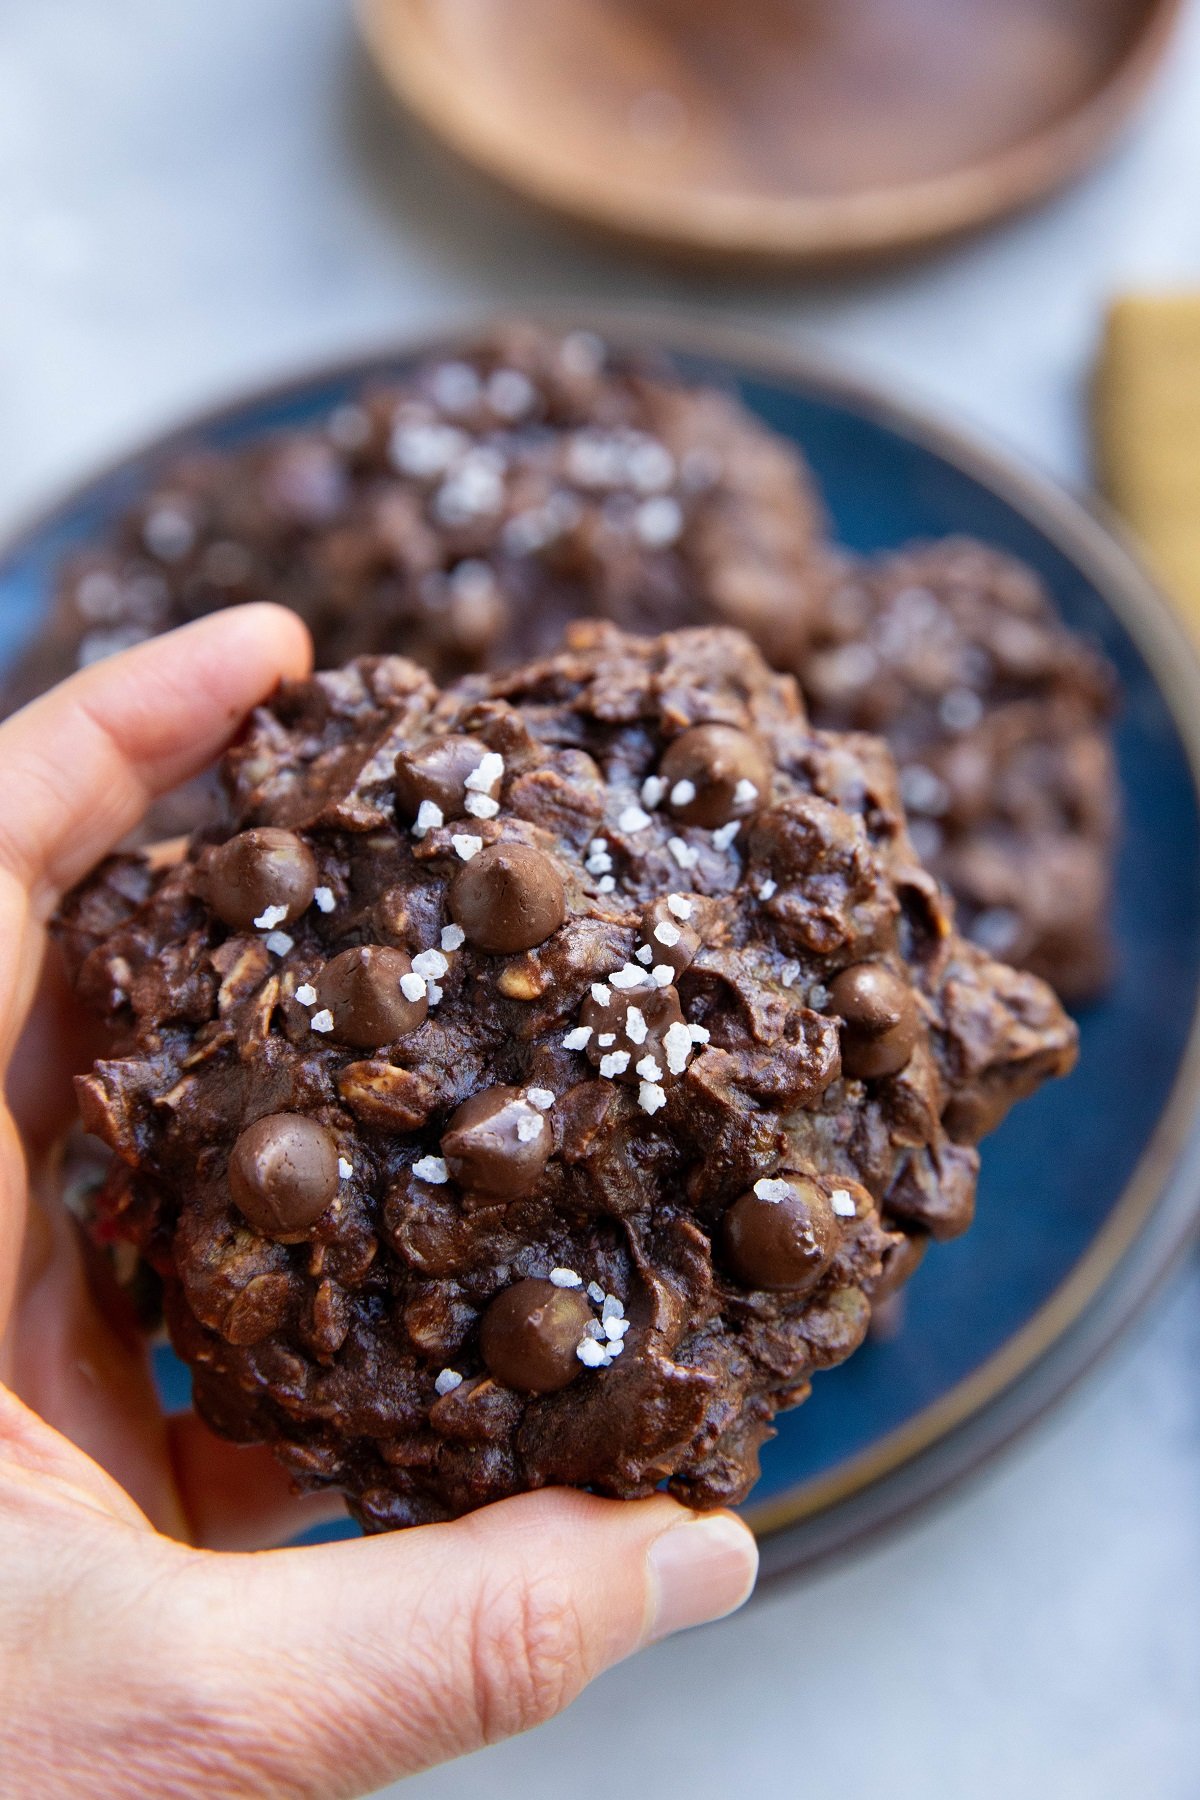 Hand holding a double chocolate chip cookie.